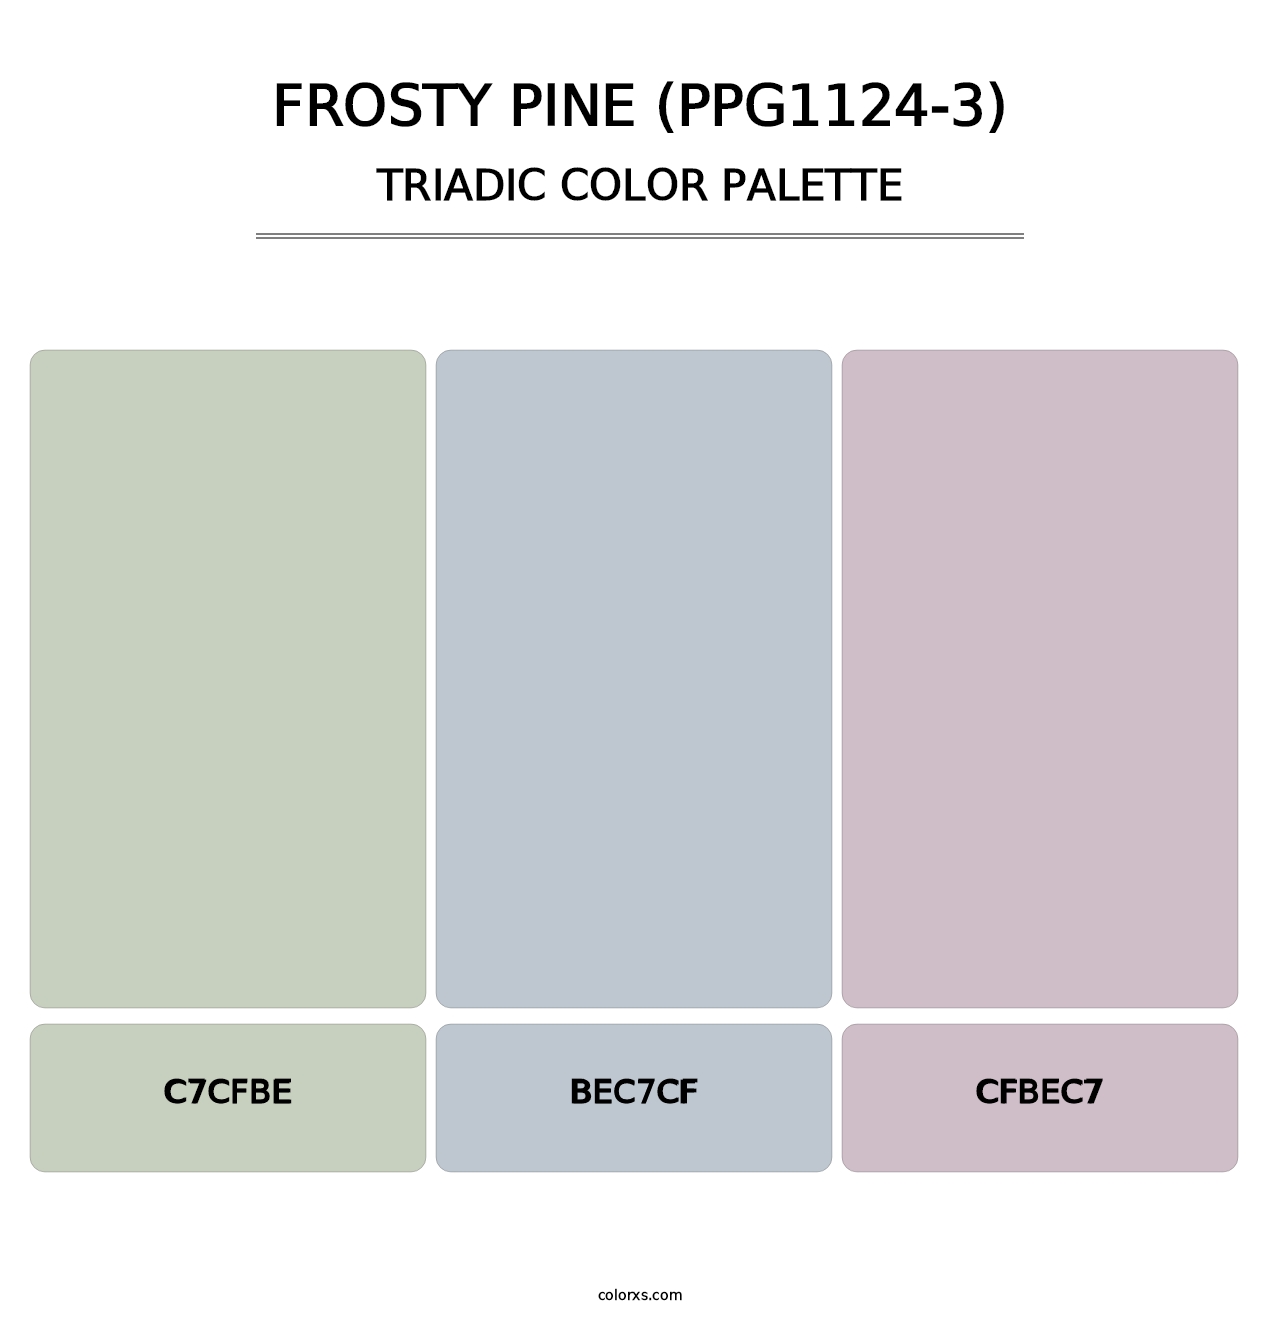 Frosty Pine (PPG1124-3) - Triadic Color Palette